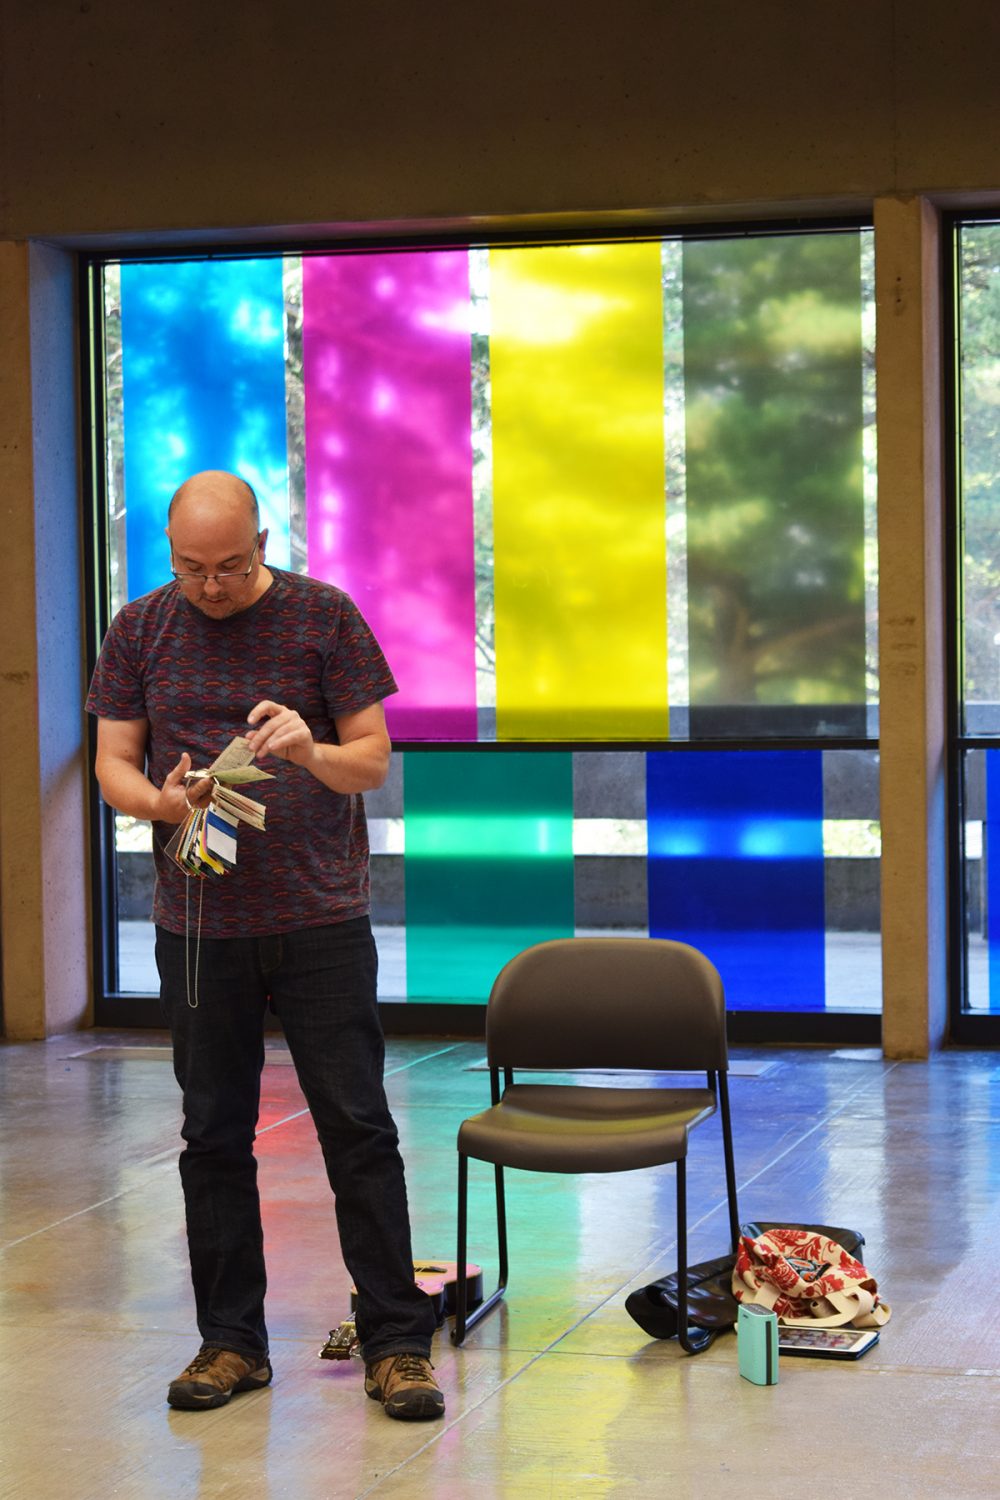 View of performance for the exhibition. A man stands to the left of an empty chair, a guitar and other objects are on the floor beside him. He is holding a large metal ring with painted cards on it and reading from the cards. Behind him is a wall of glass with large bands of blue, magenta, yellow and green vinyl.